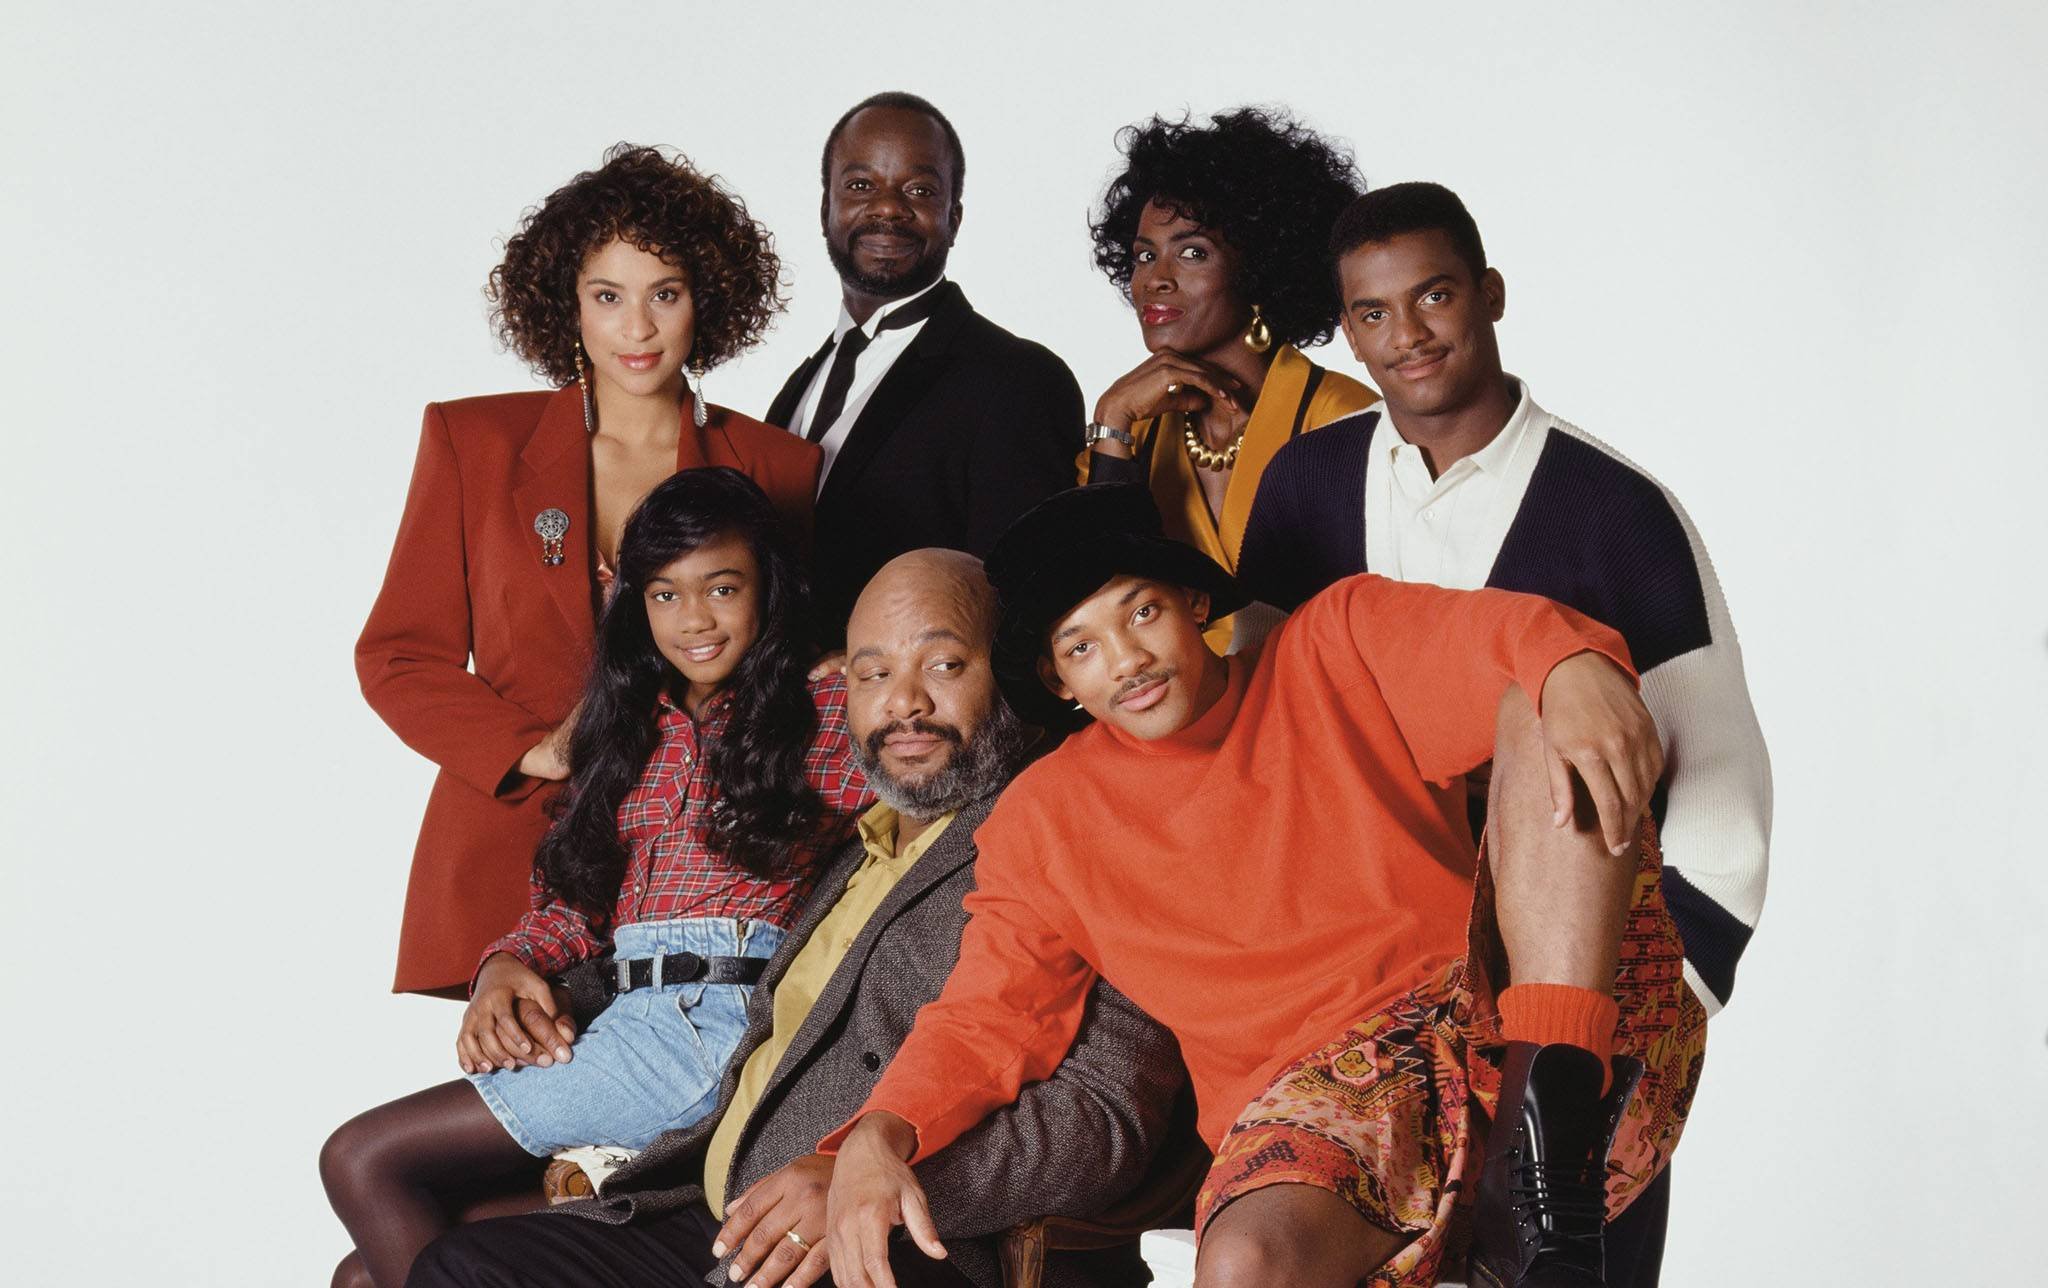 fresh prince of bel air, Comedy, Series, Television, Will